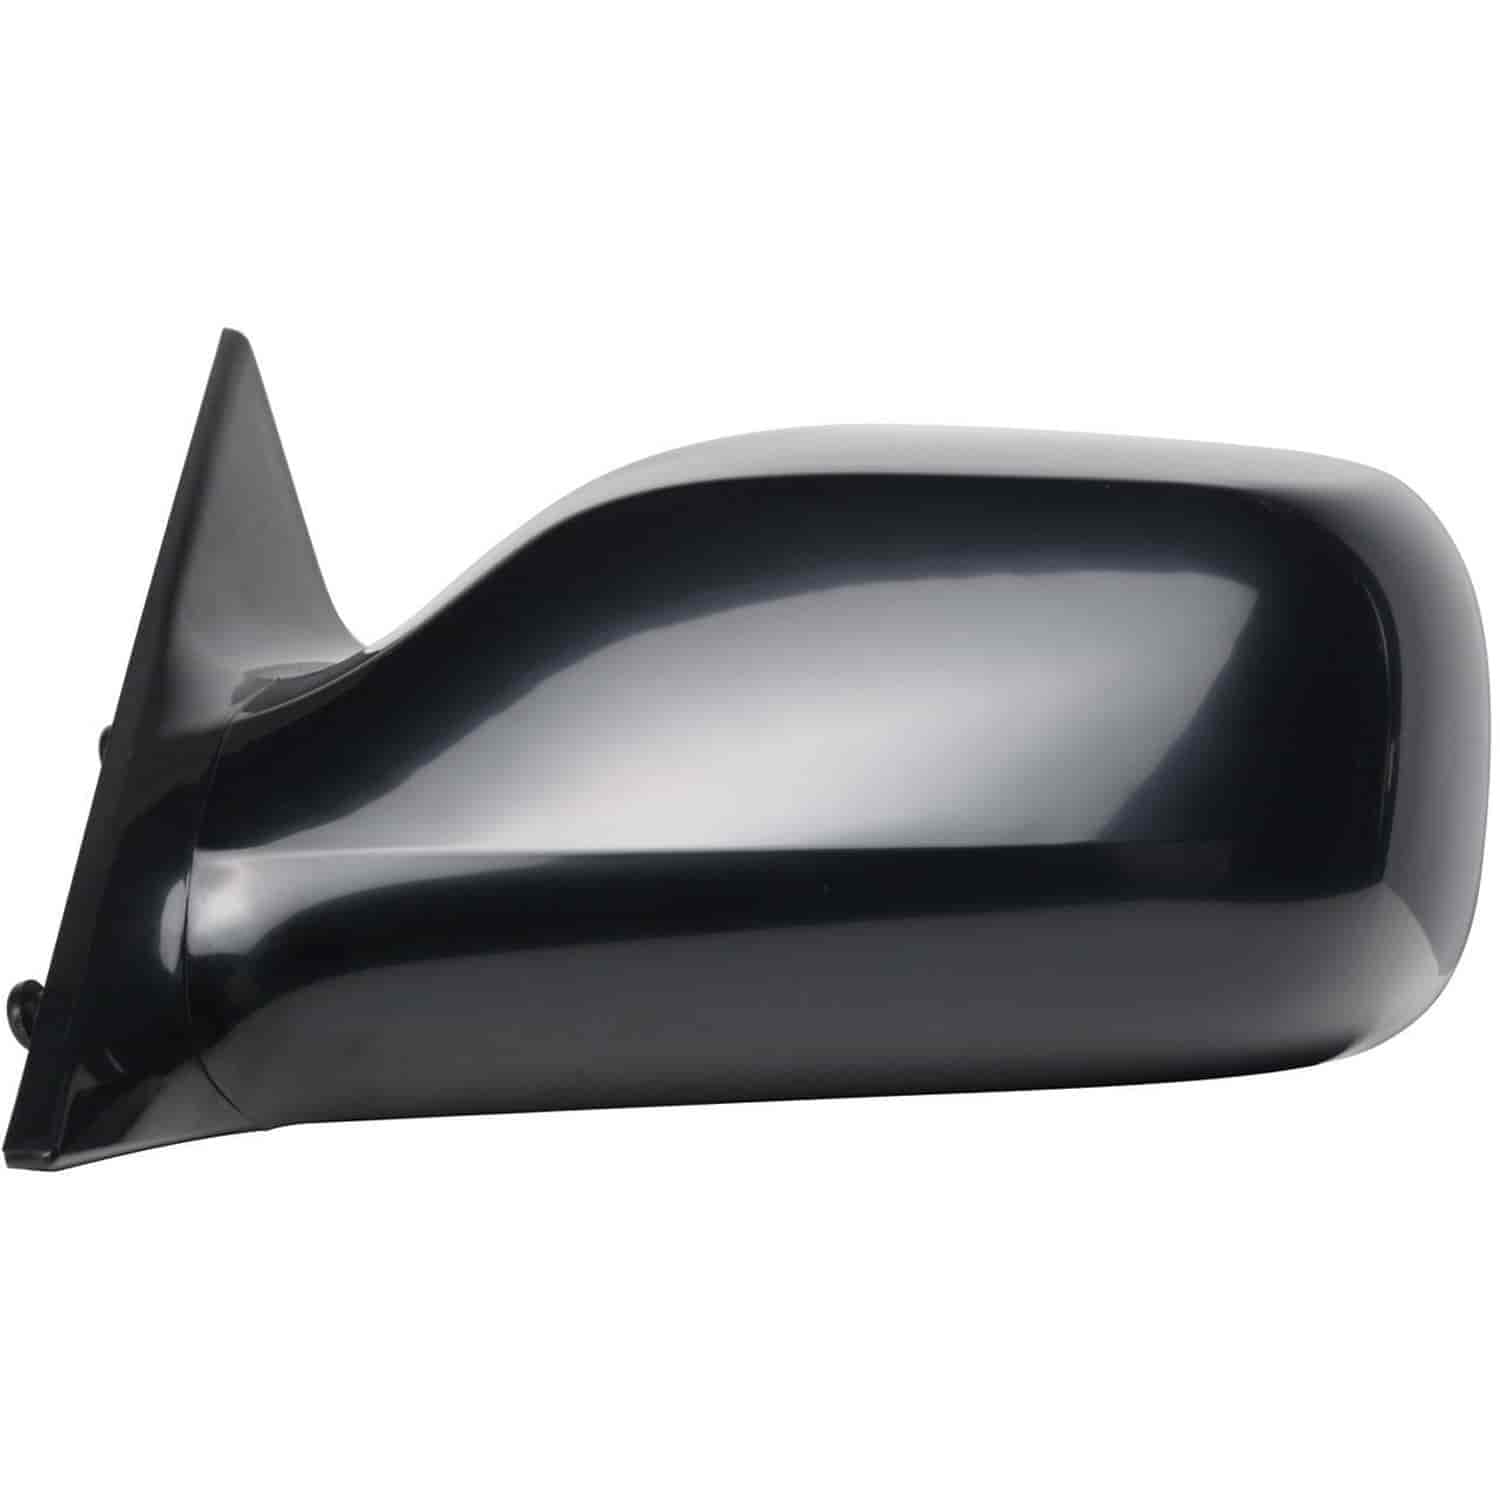 OEM Style Replacement mirror for 05-10 Toyota Avalon